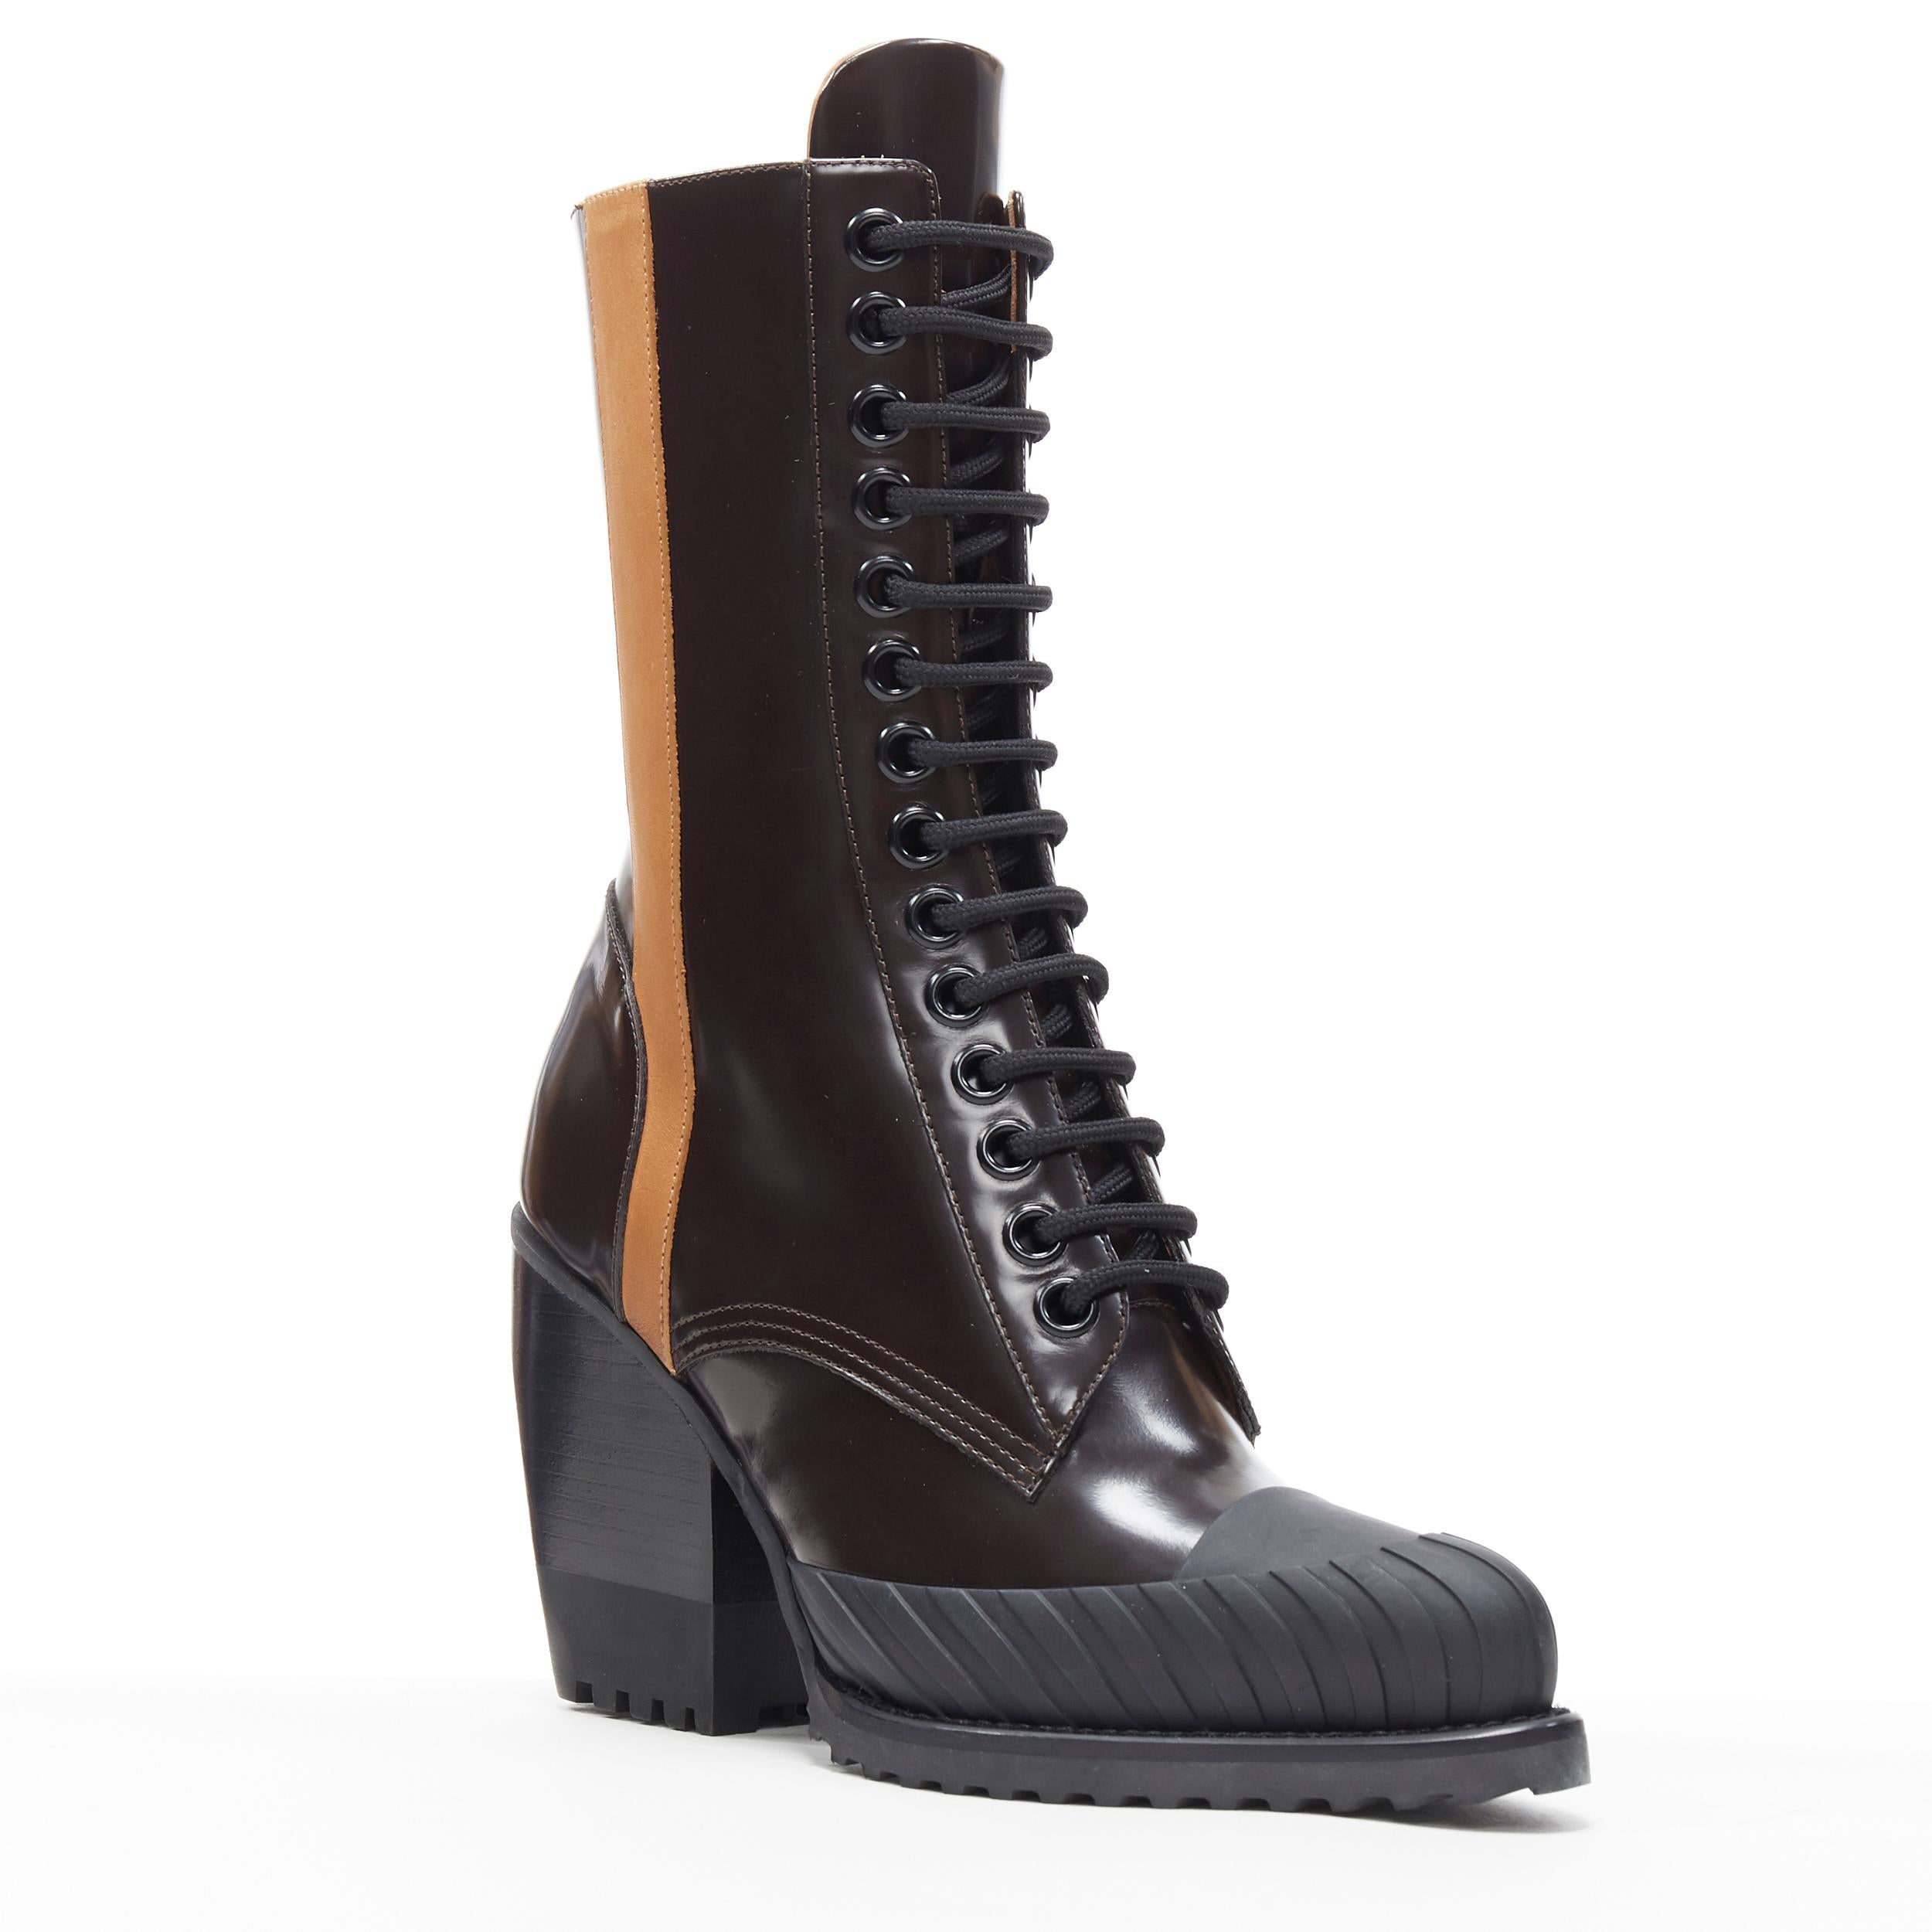 new CHLOE Runway Rylee brown glossy leather block heel heel rubber boot EU38.5
Brand: Chloe
Model Name / Style: Rylee
Material: Leather
Color: Brown
Pattern: Solid
Closure: Lace up
Extra Detail: Signature Runway Rylee boots by Chloe. Ankle boots.